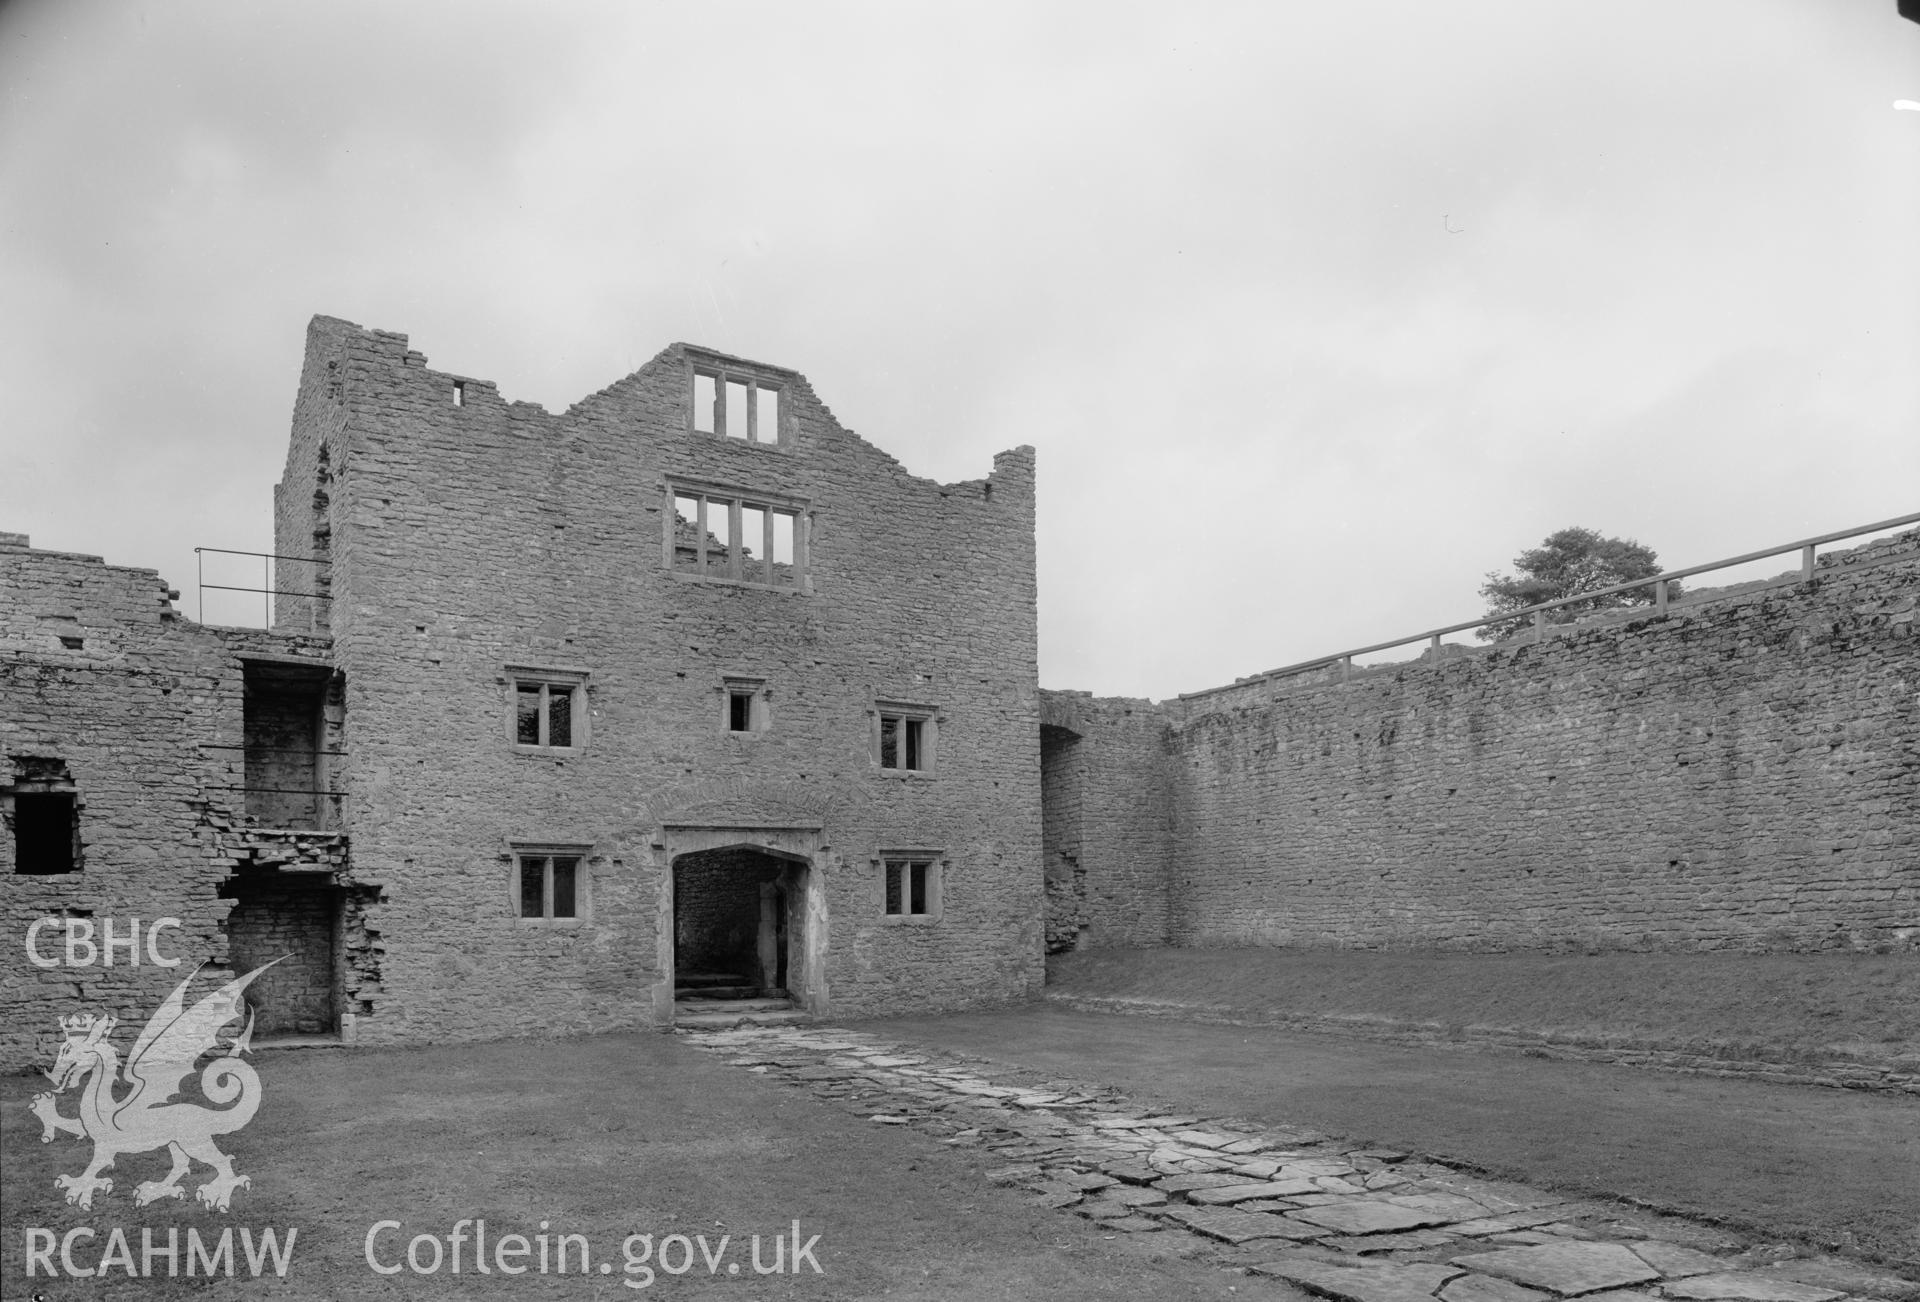 D.O.E. photograph of Beaupre Castle - courtyard from southwest corner.